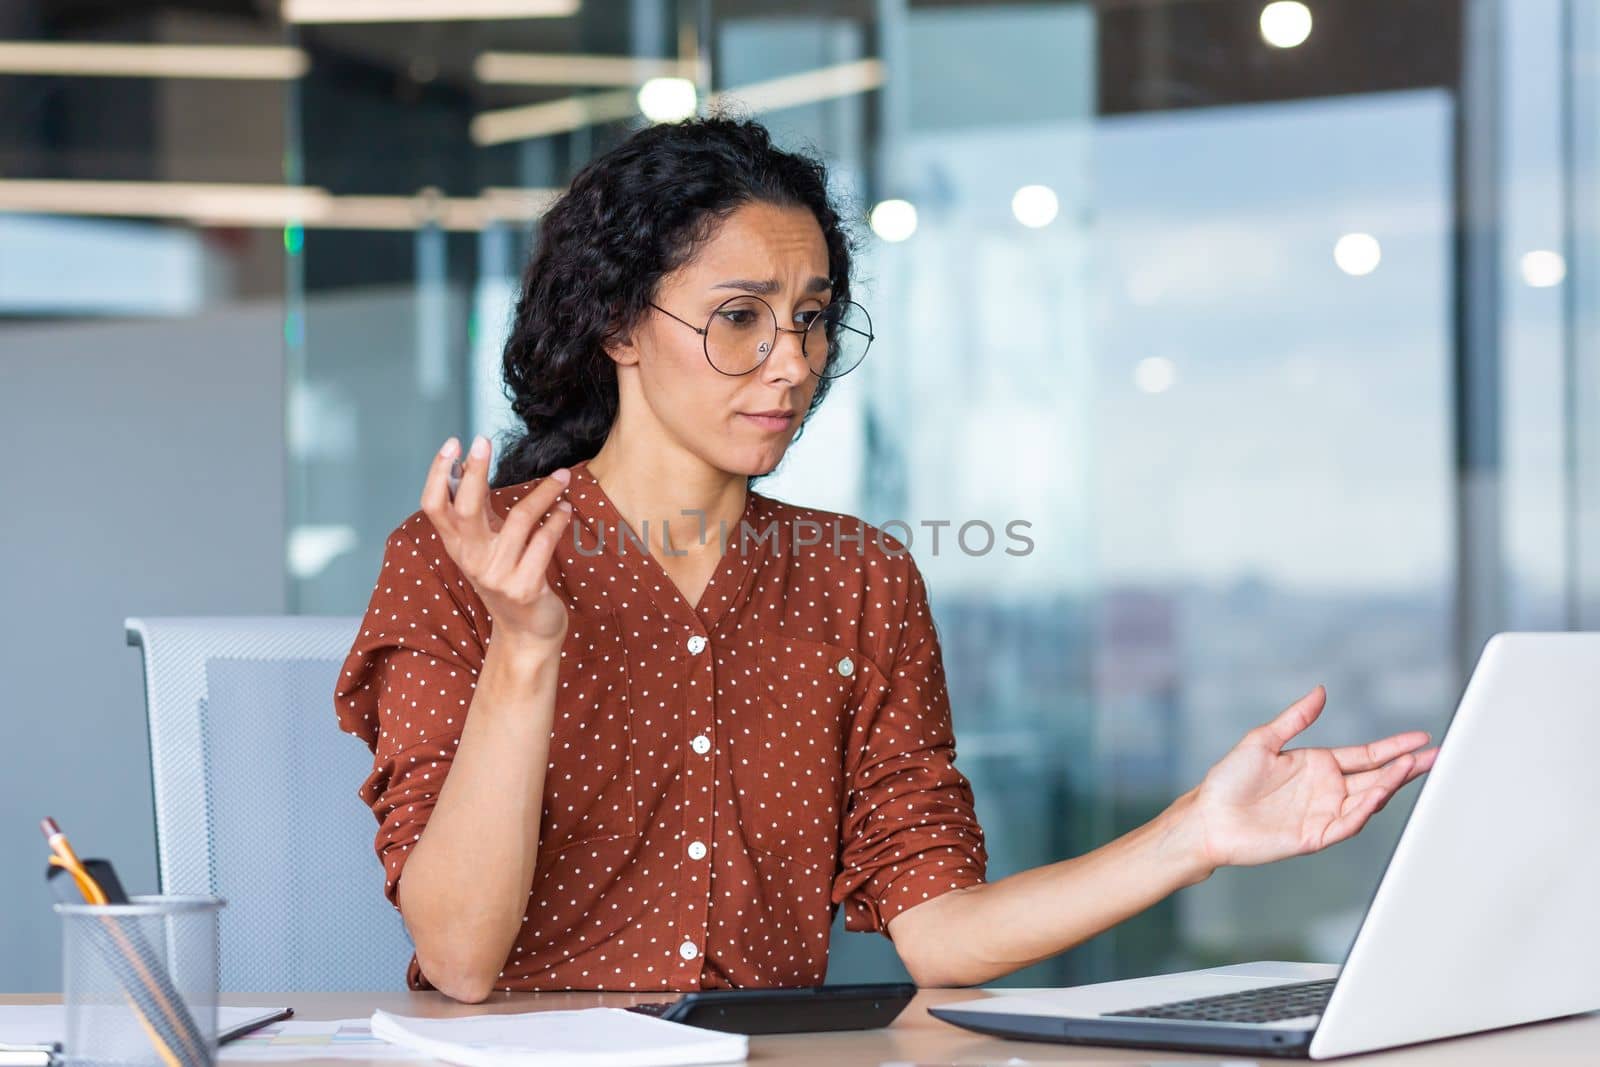 Businesswoman disappointed and sad at work, not happy with the result of achievement at work, Hispanic woman desperate and sad working inside office using laptop at work.